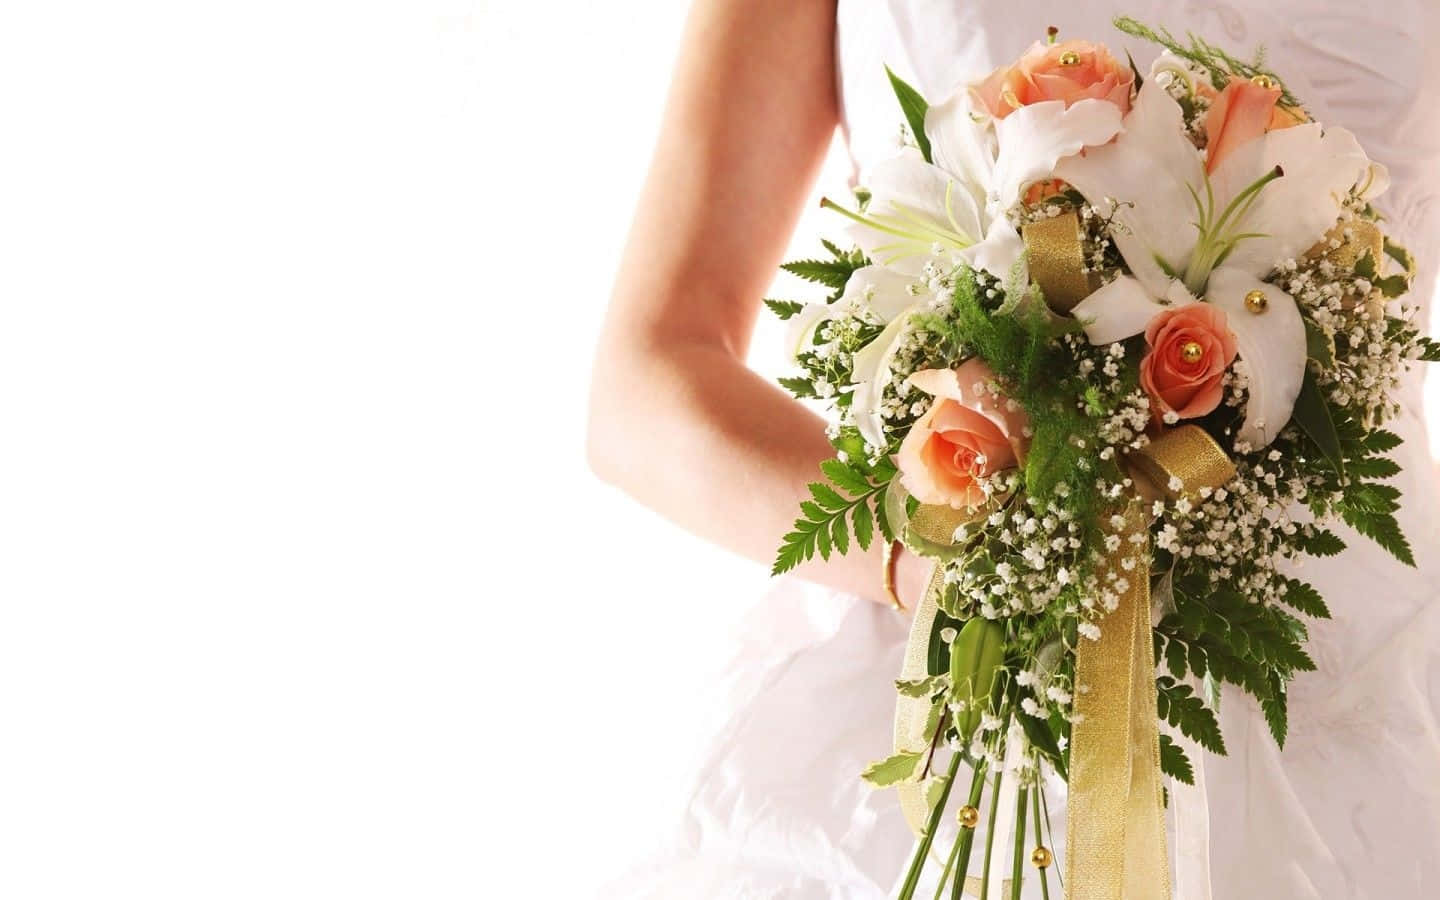 Stunning Bridal Bouquet at a Wedding Ceremony Wallpaper